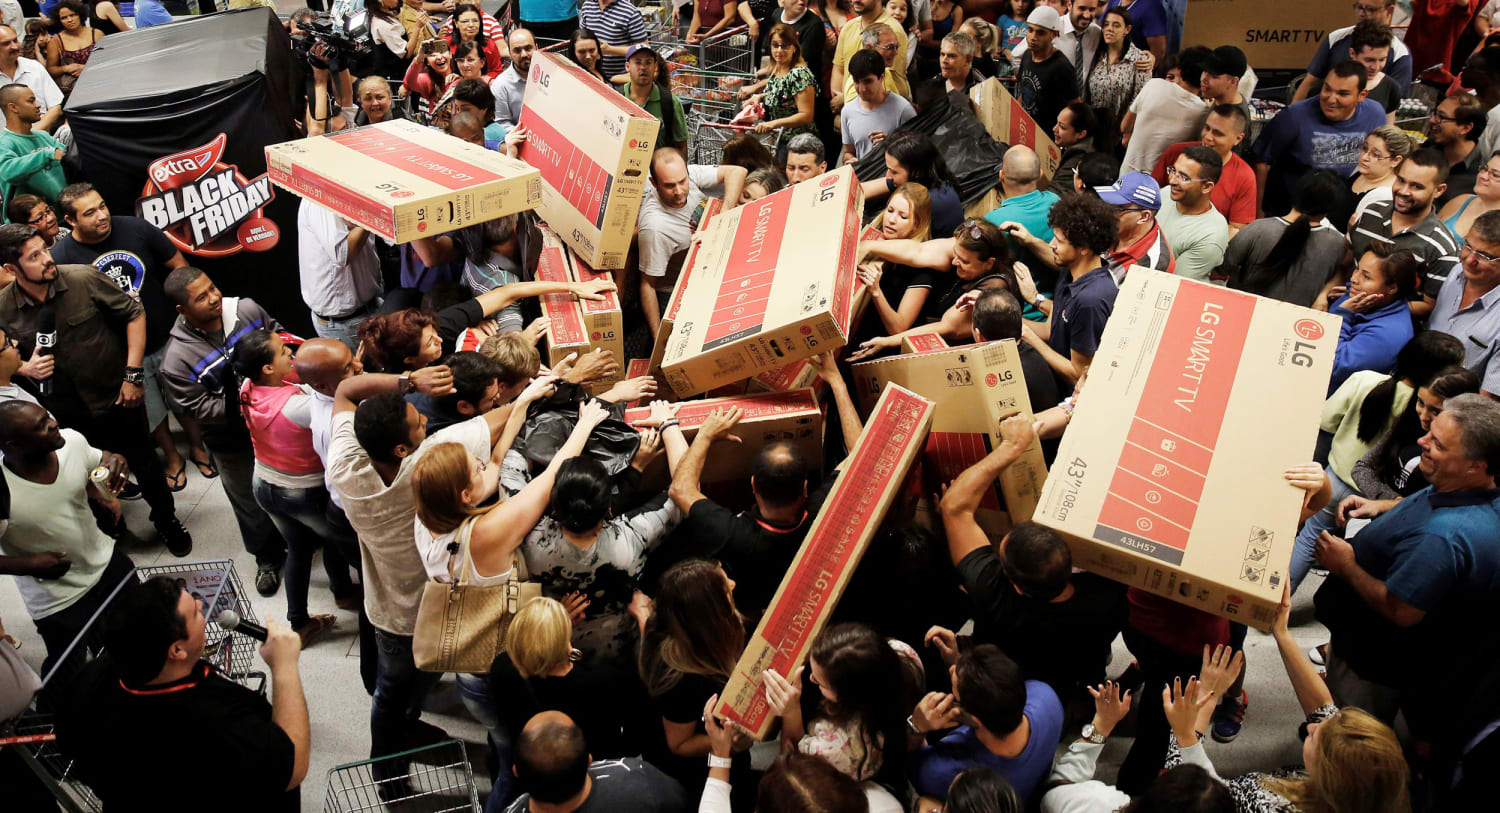 This Black Friday may bring about increased shipping times and higher prices